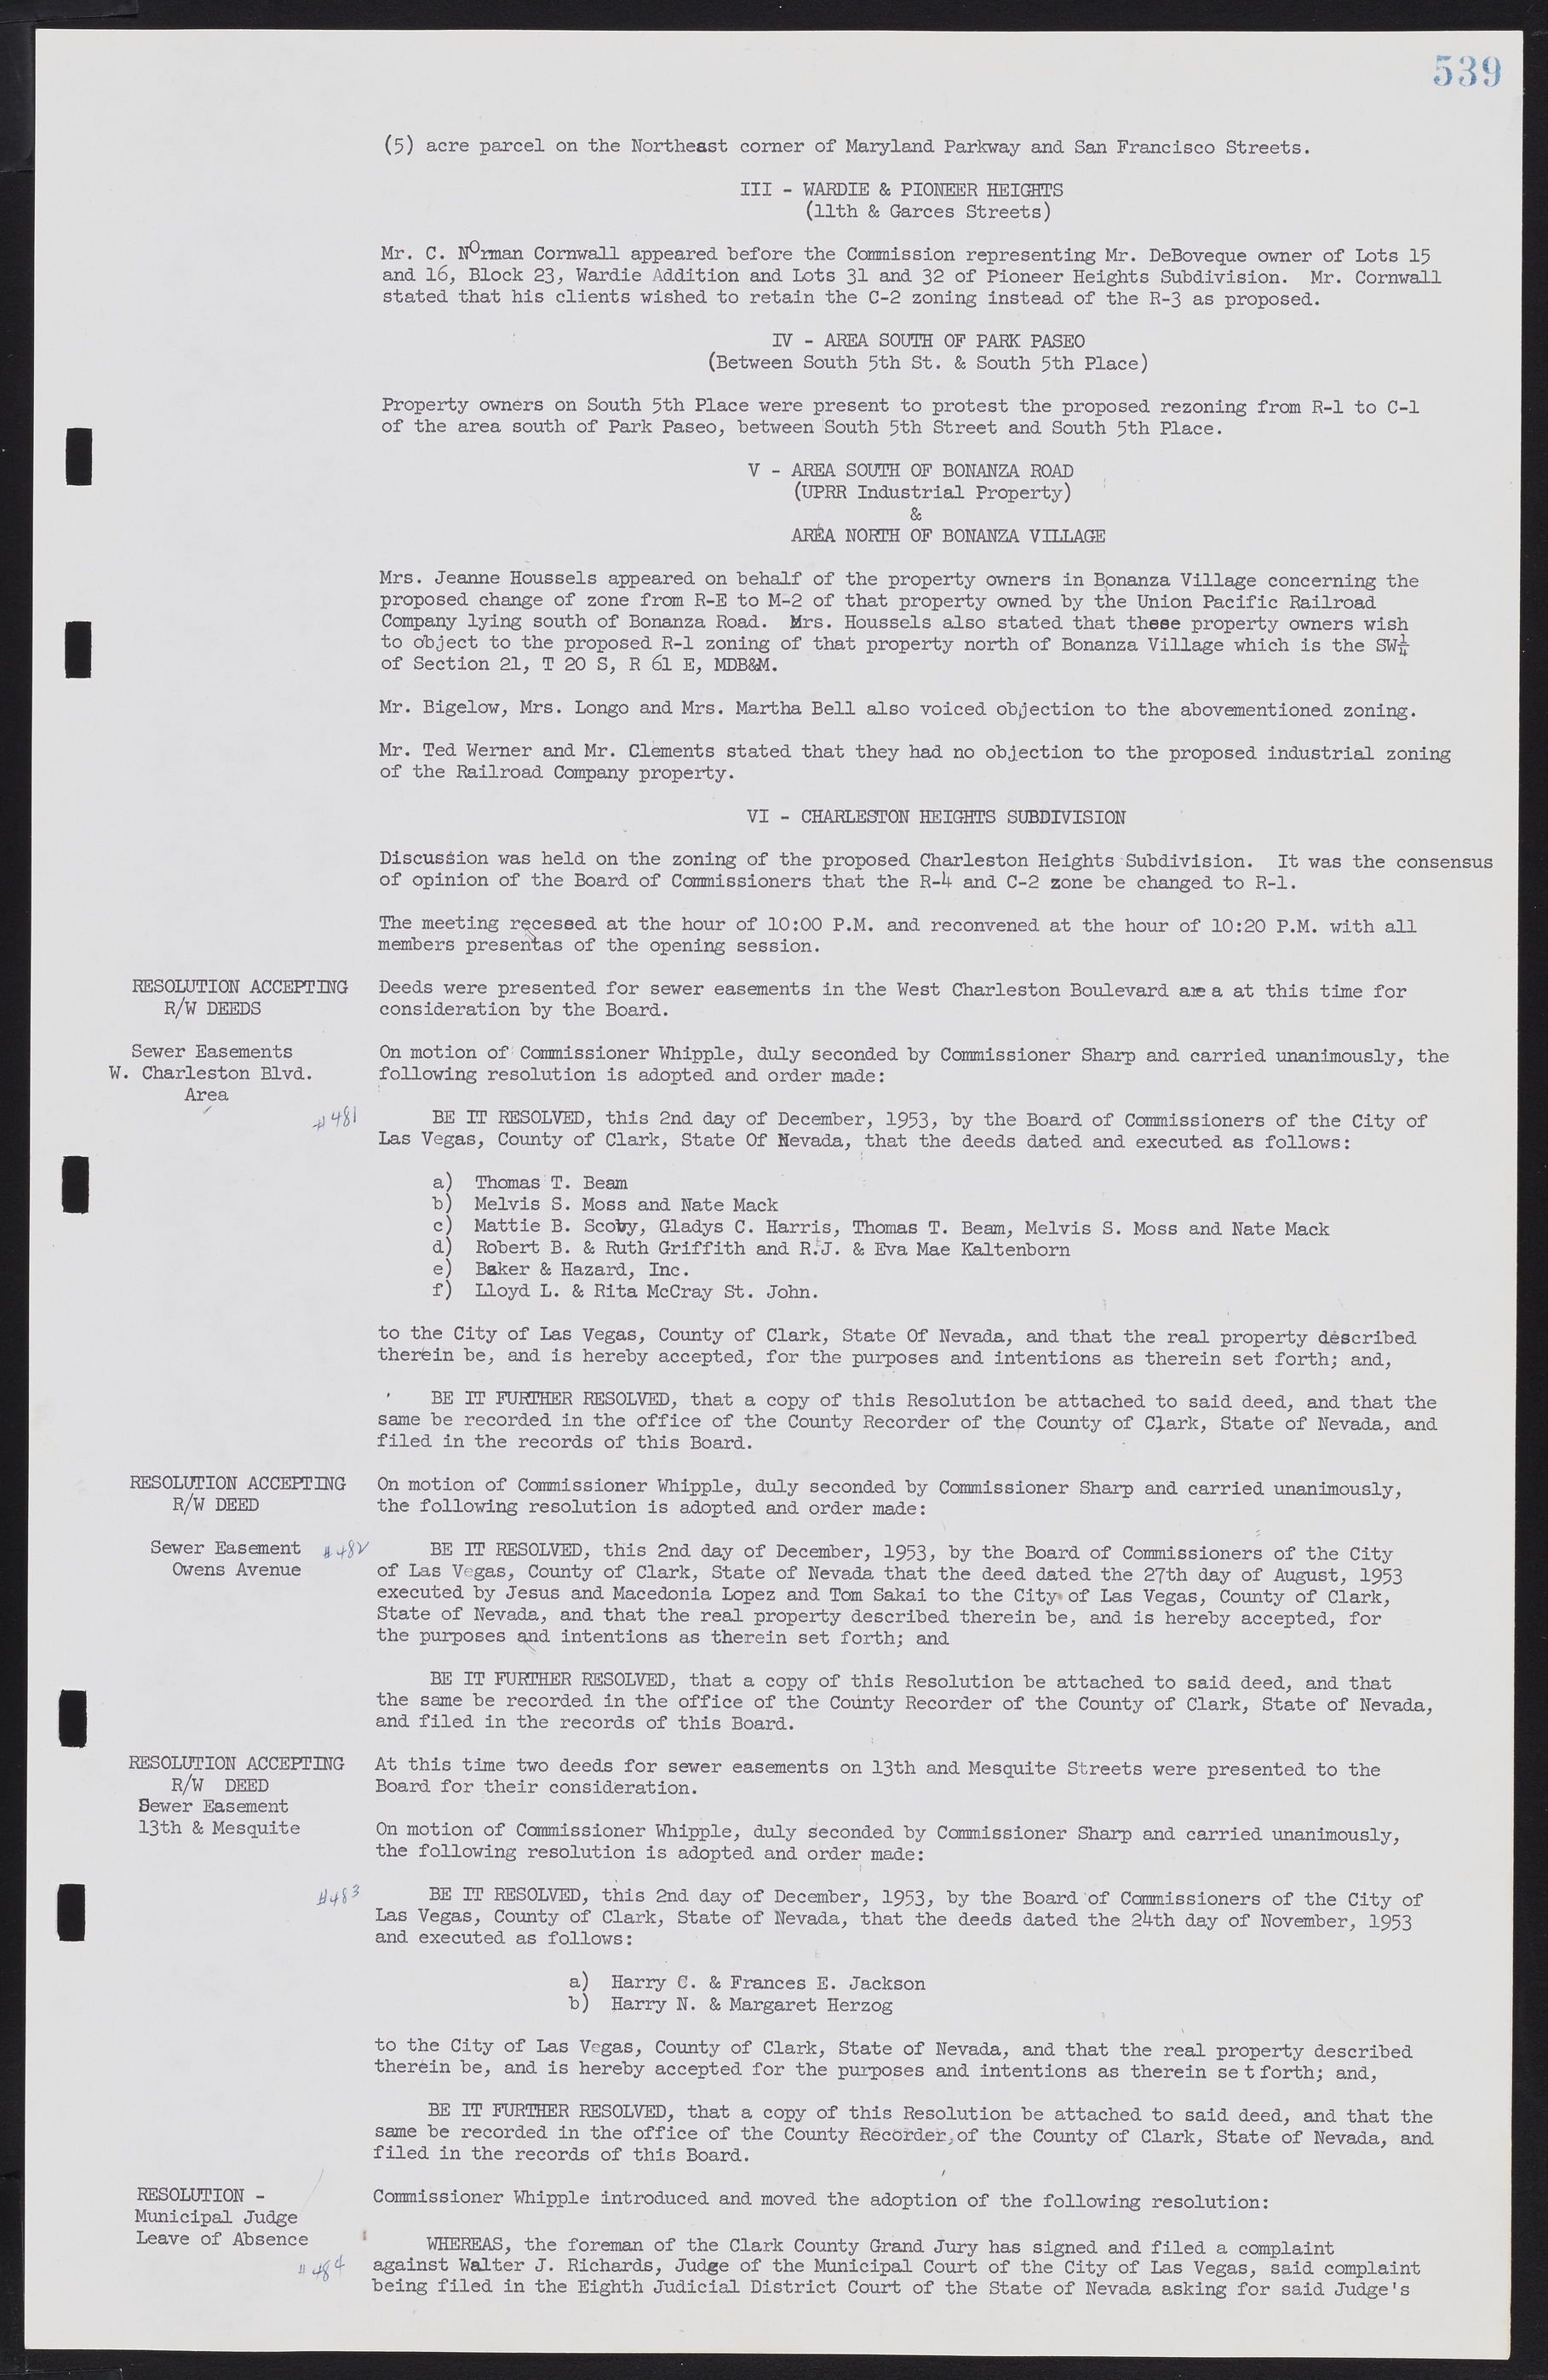 Las Vegas City Commission Minutes, May 26, 1952 to February 17, 1954, lvc000008-569